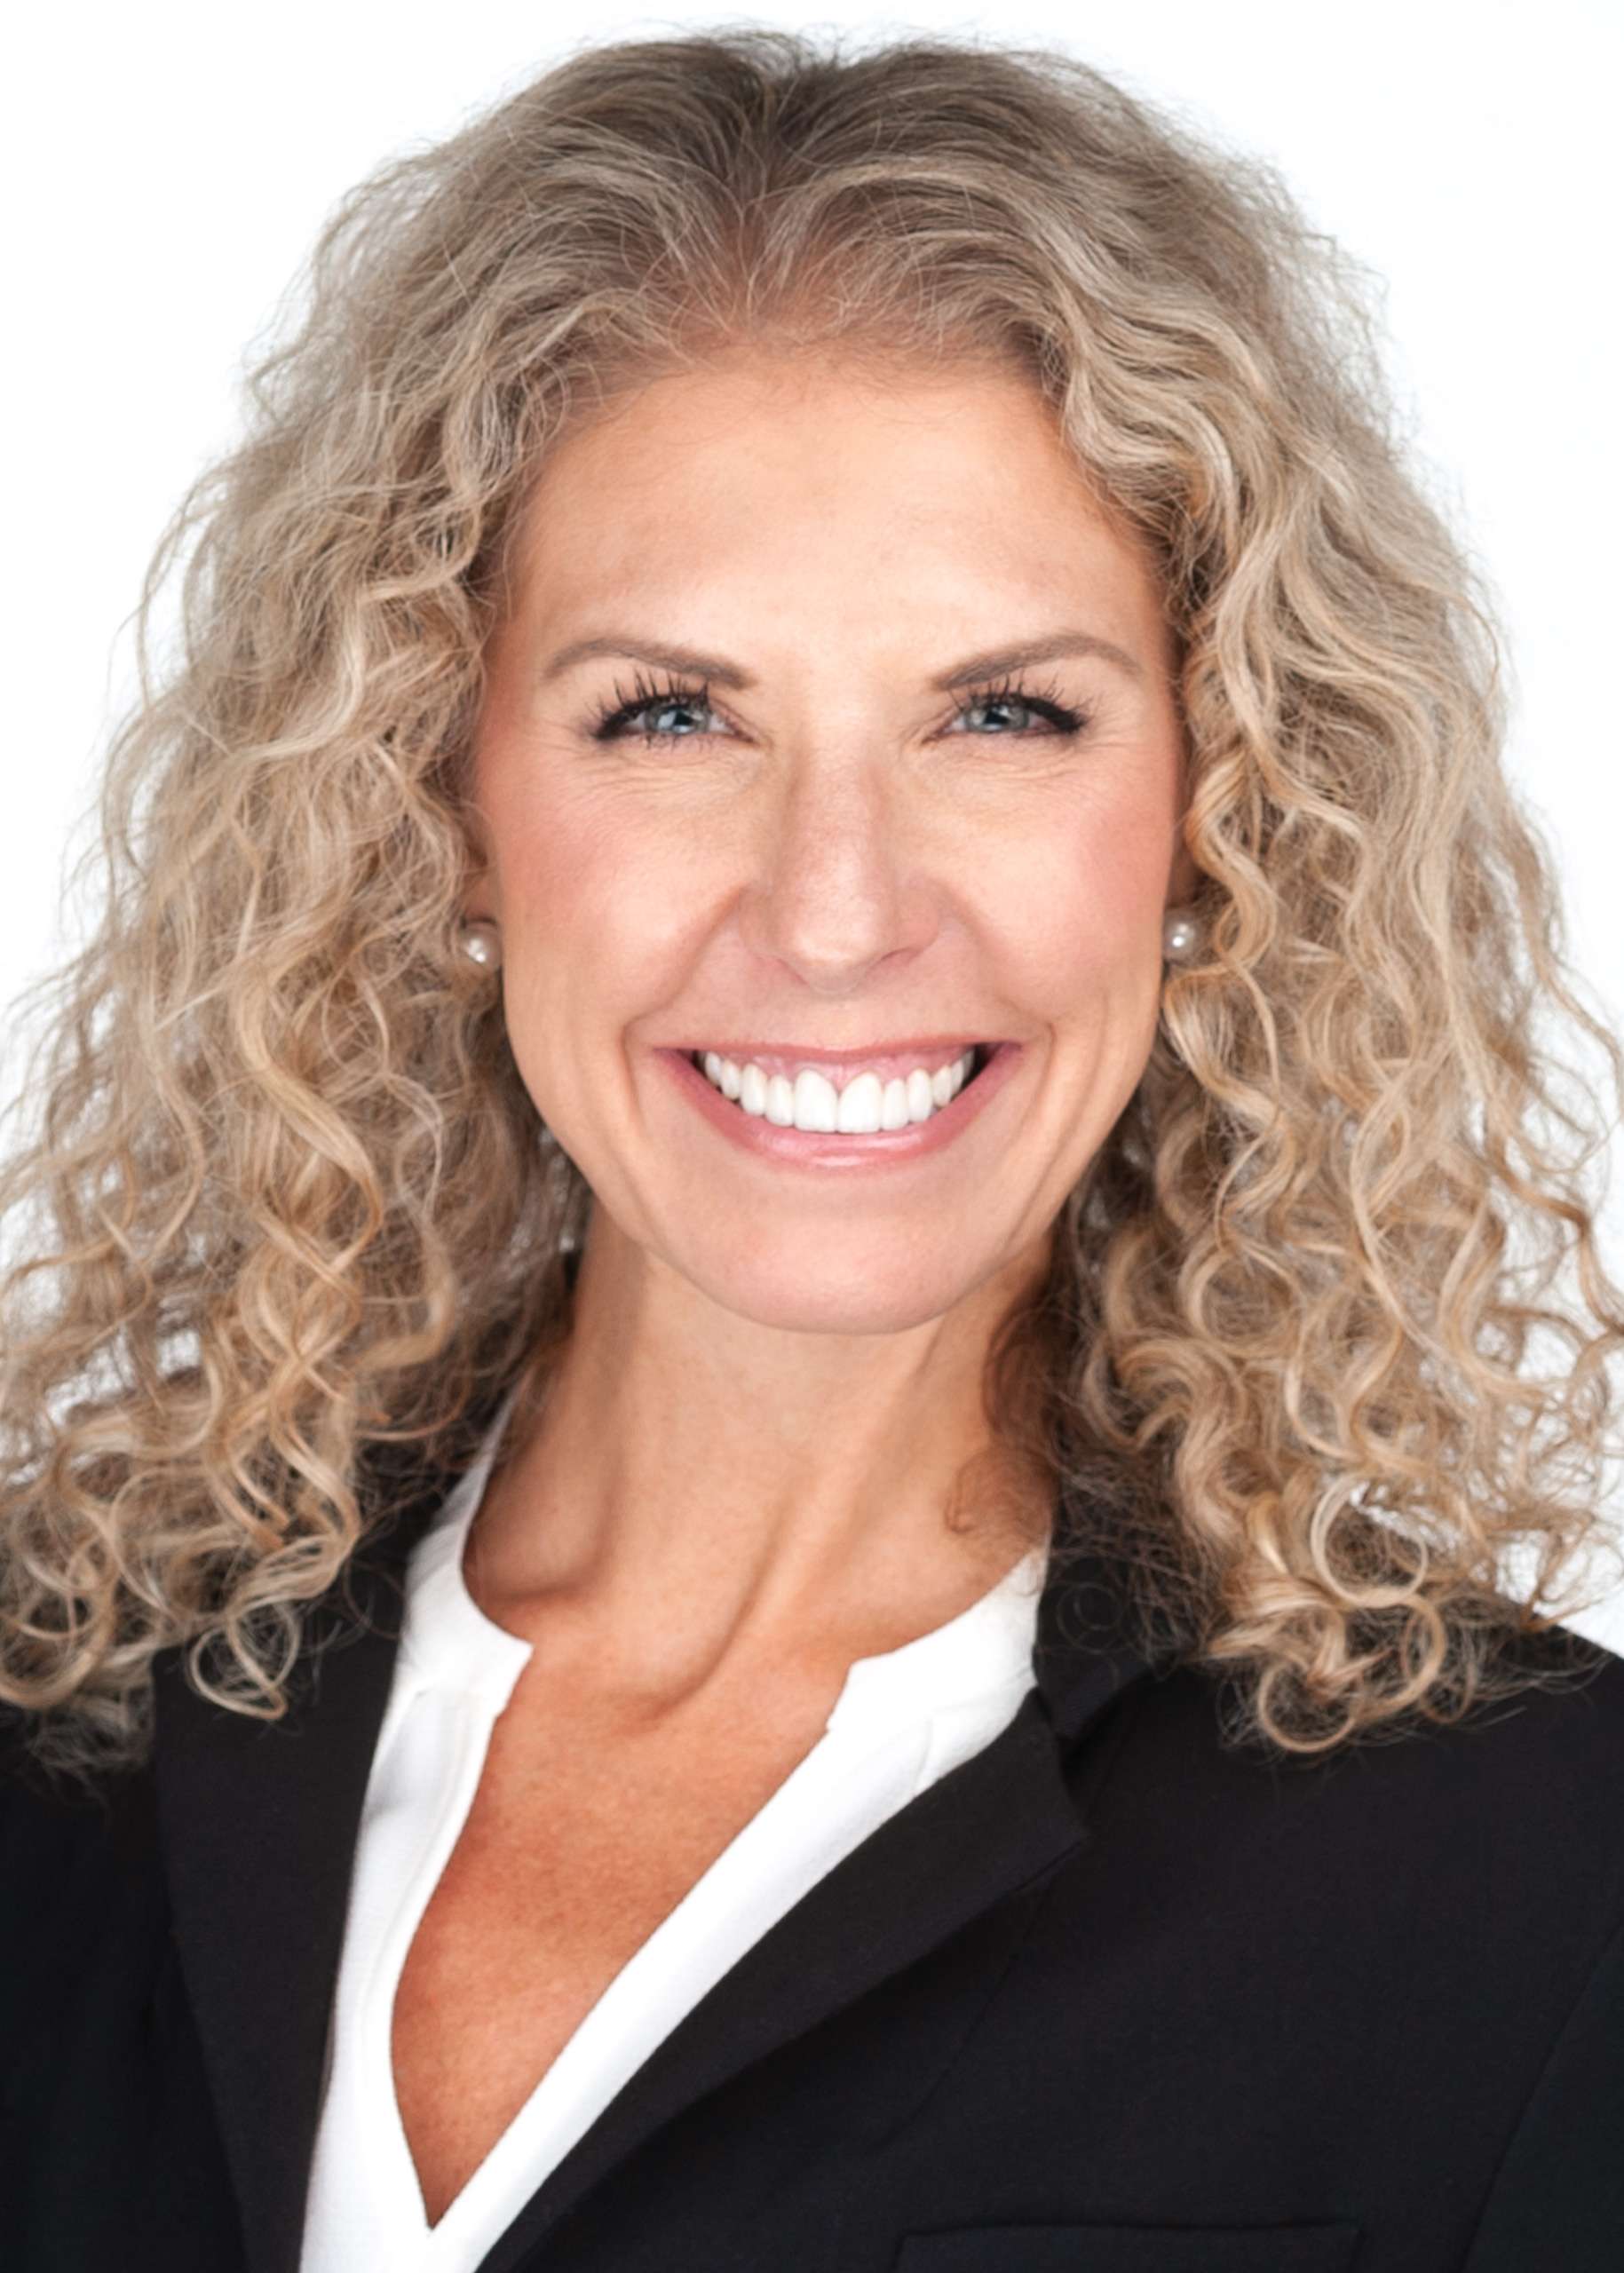 A smiling woman with curly hair in a business suit, captured by Sarah Anne Wilson Photography in Cary, North Carolina. The image showcases a professional look suitable for corporate headshots or business headshots